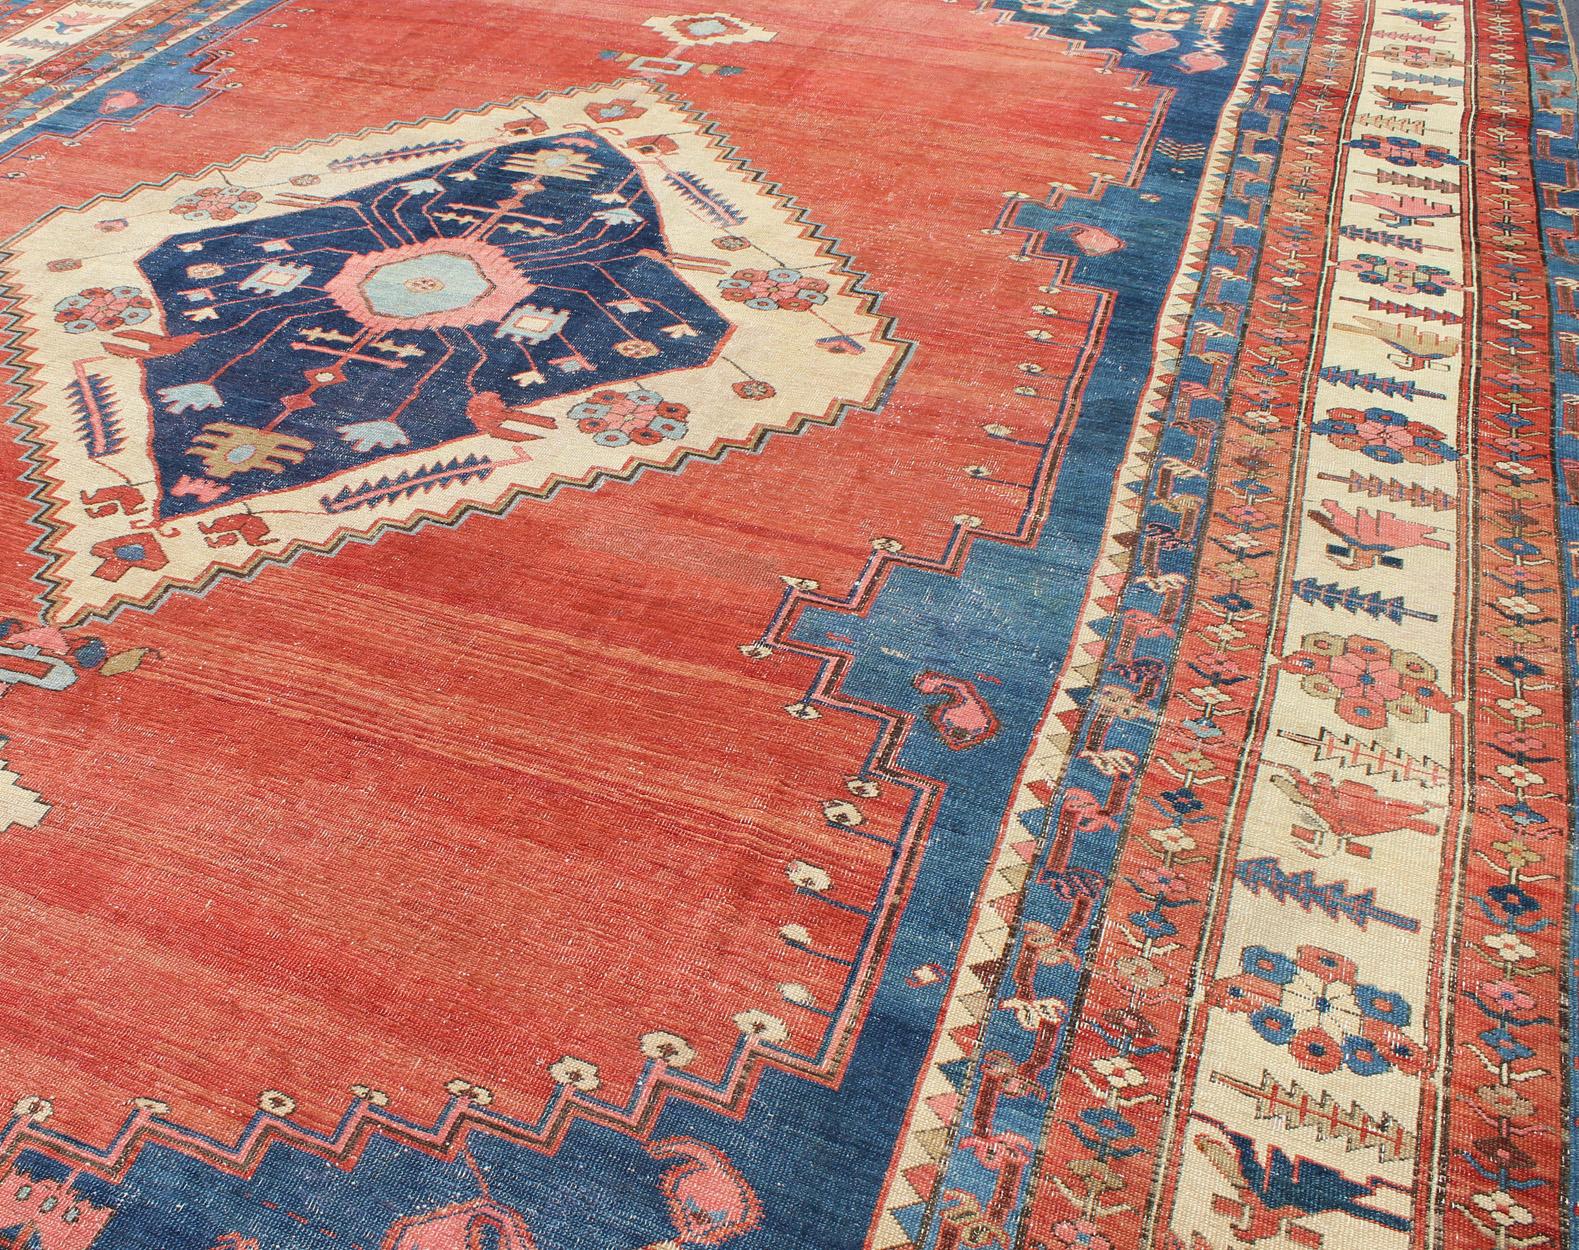 Finely Woven 19th Century Antique Persian Bakhshaiesh Rug in Rust Red and Blue For Sale 2